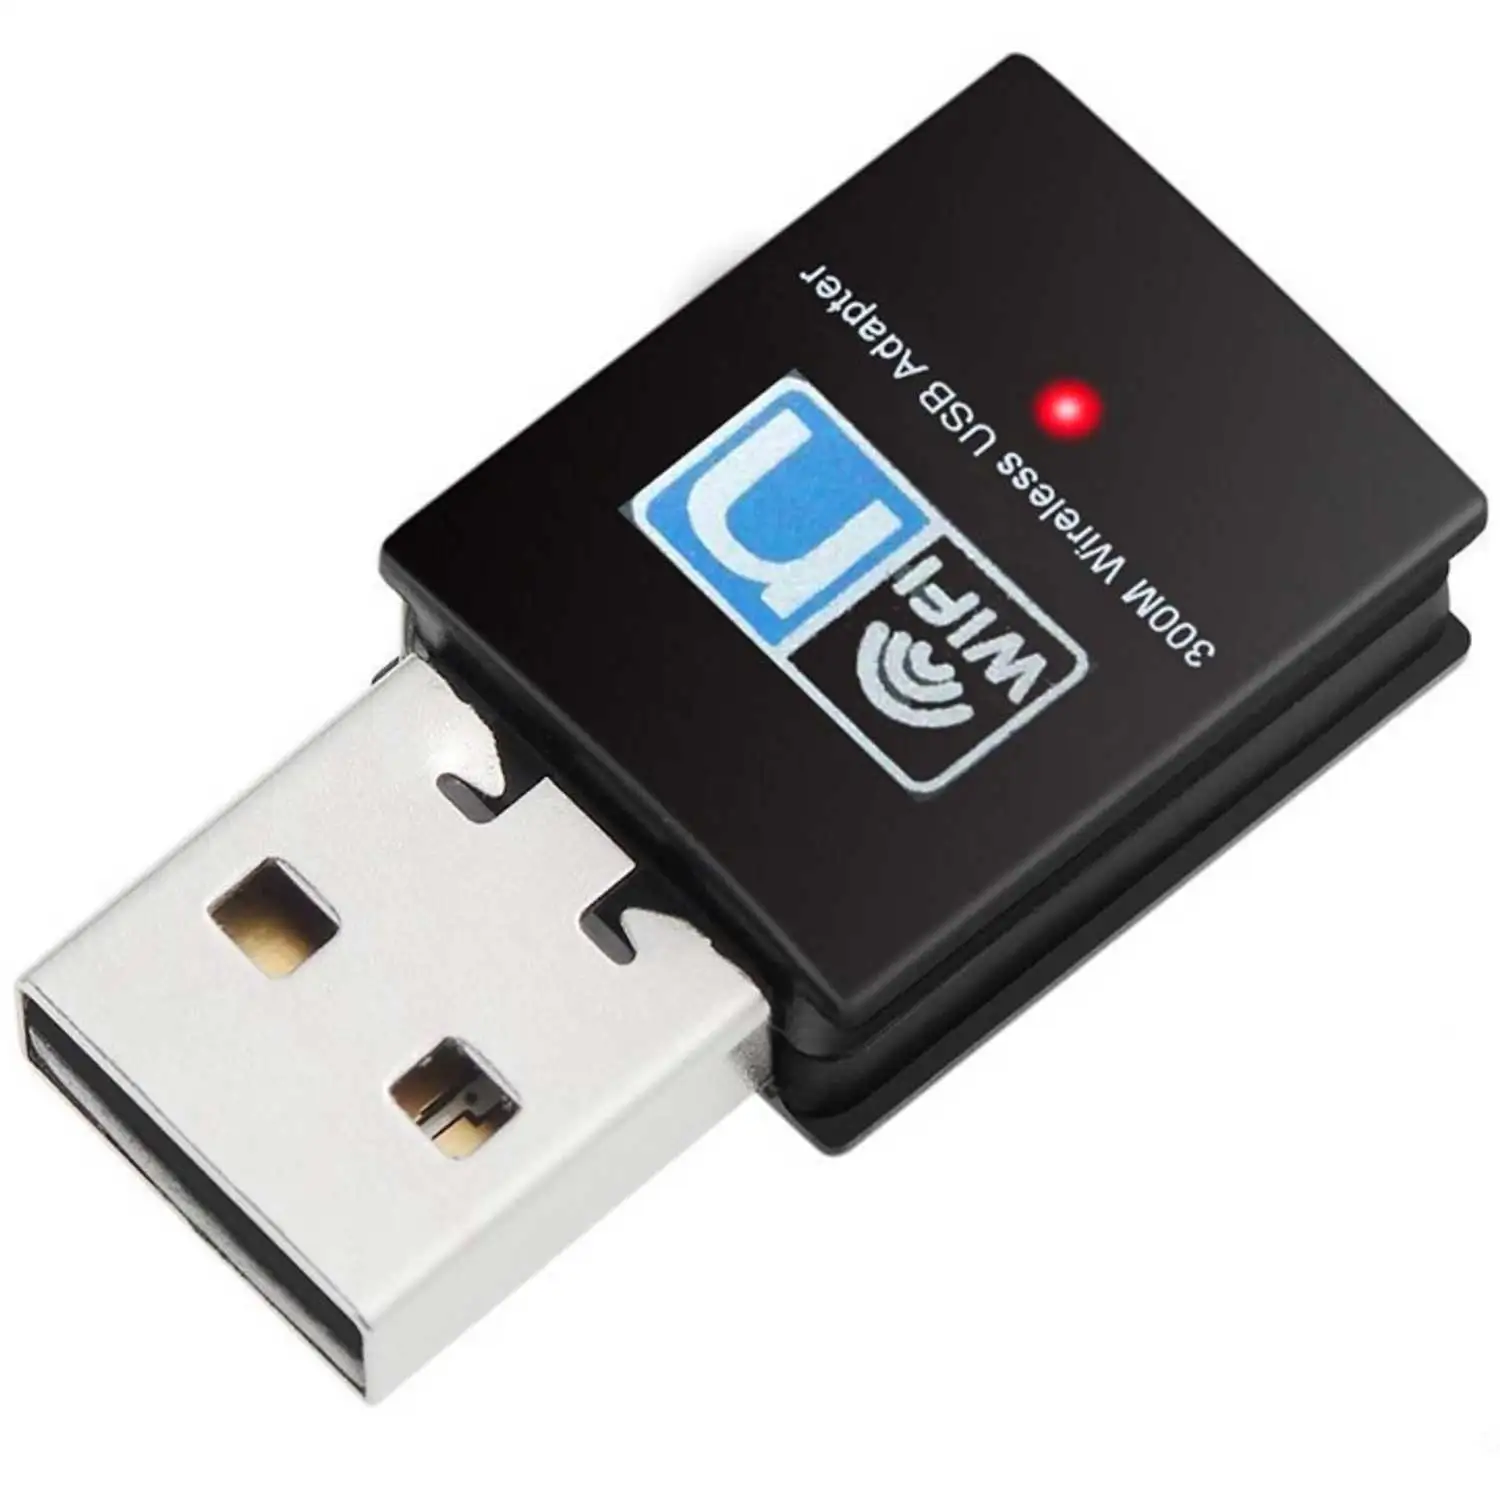 

Wifi Adapter For Atheros Ar9271L 802.11N 150Mbps Wireless Usb +3Dbi Antenna For Kali Linux/Windows Xp/7/8/10/Roland Piano